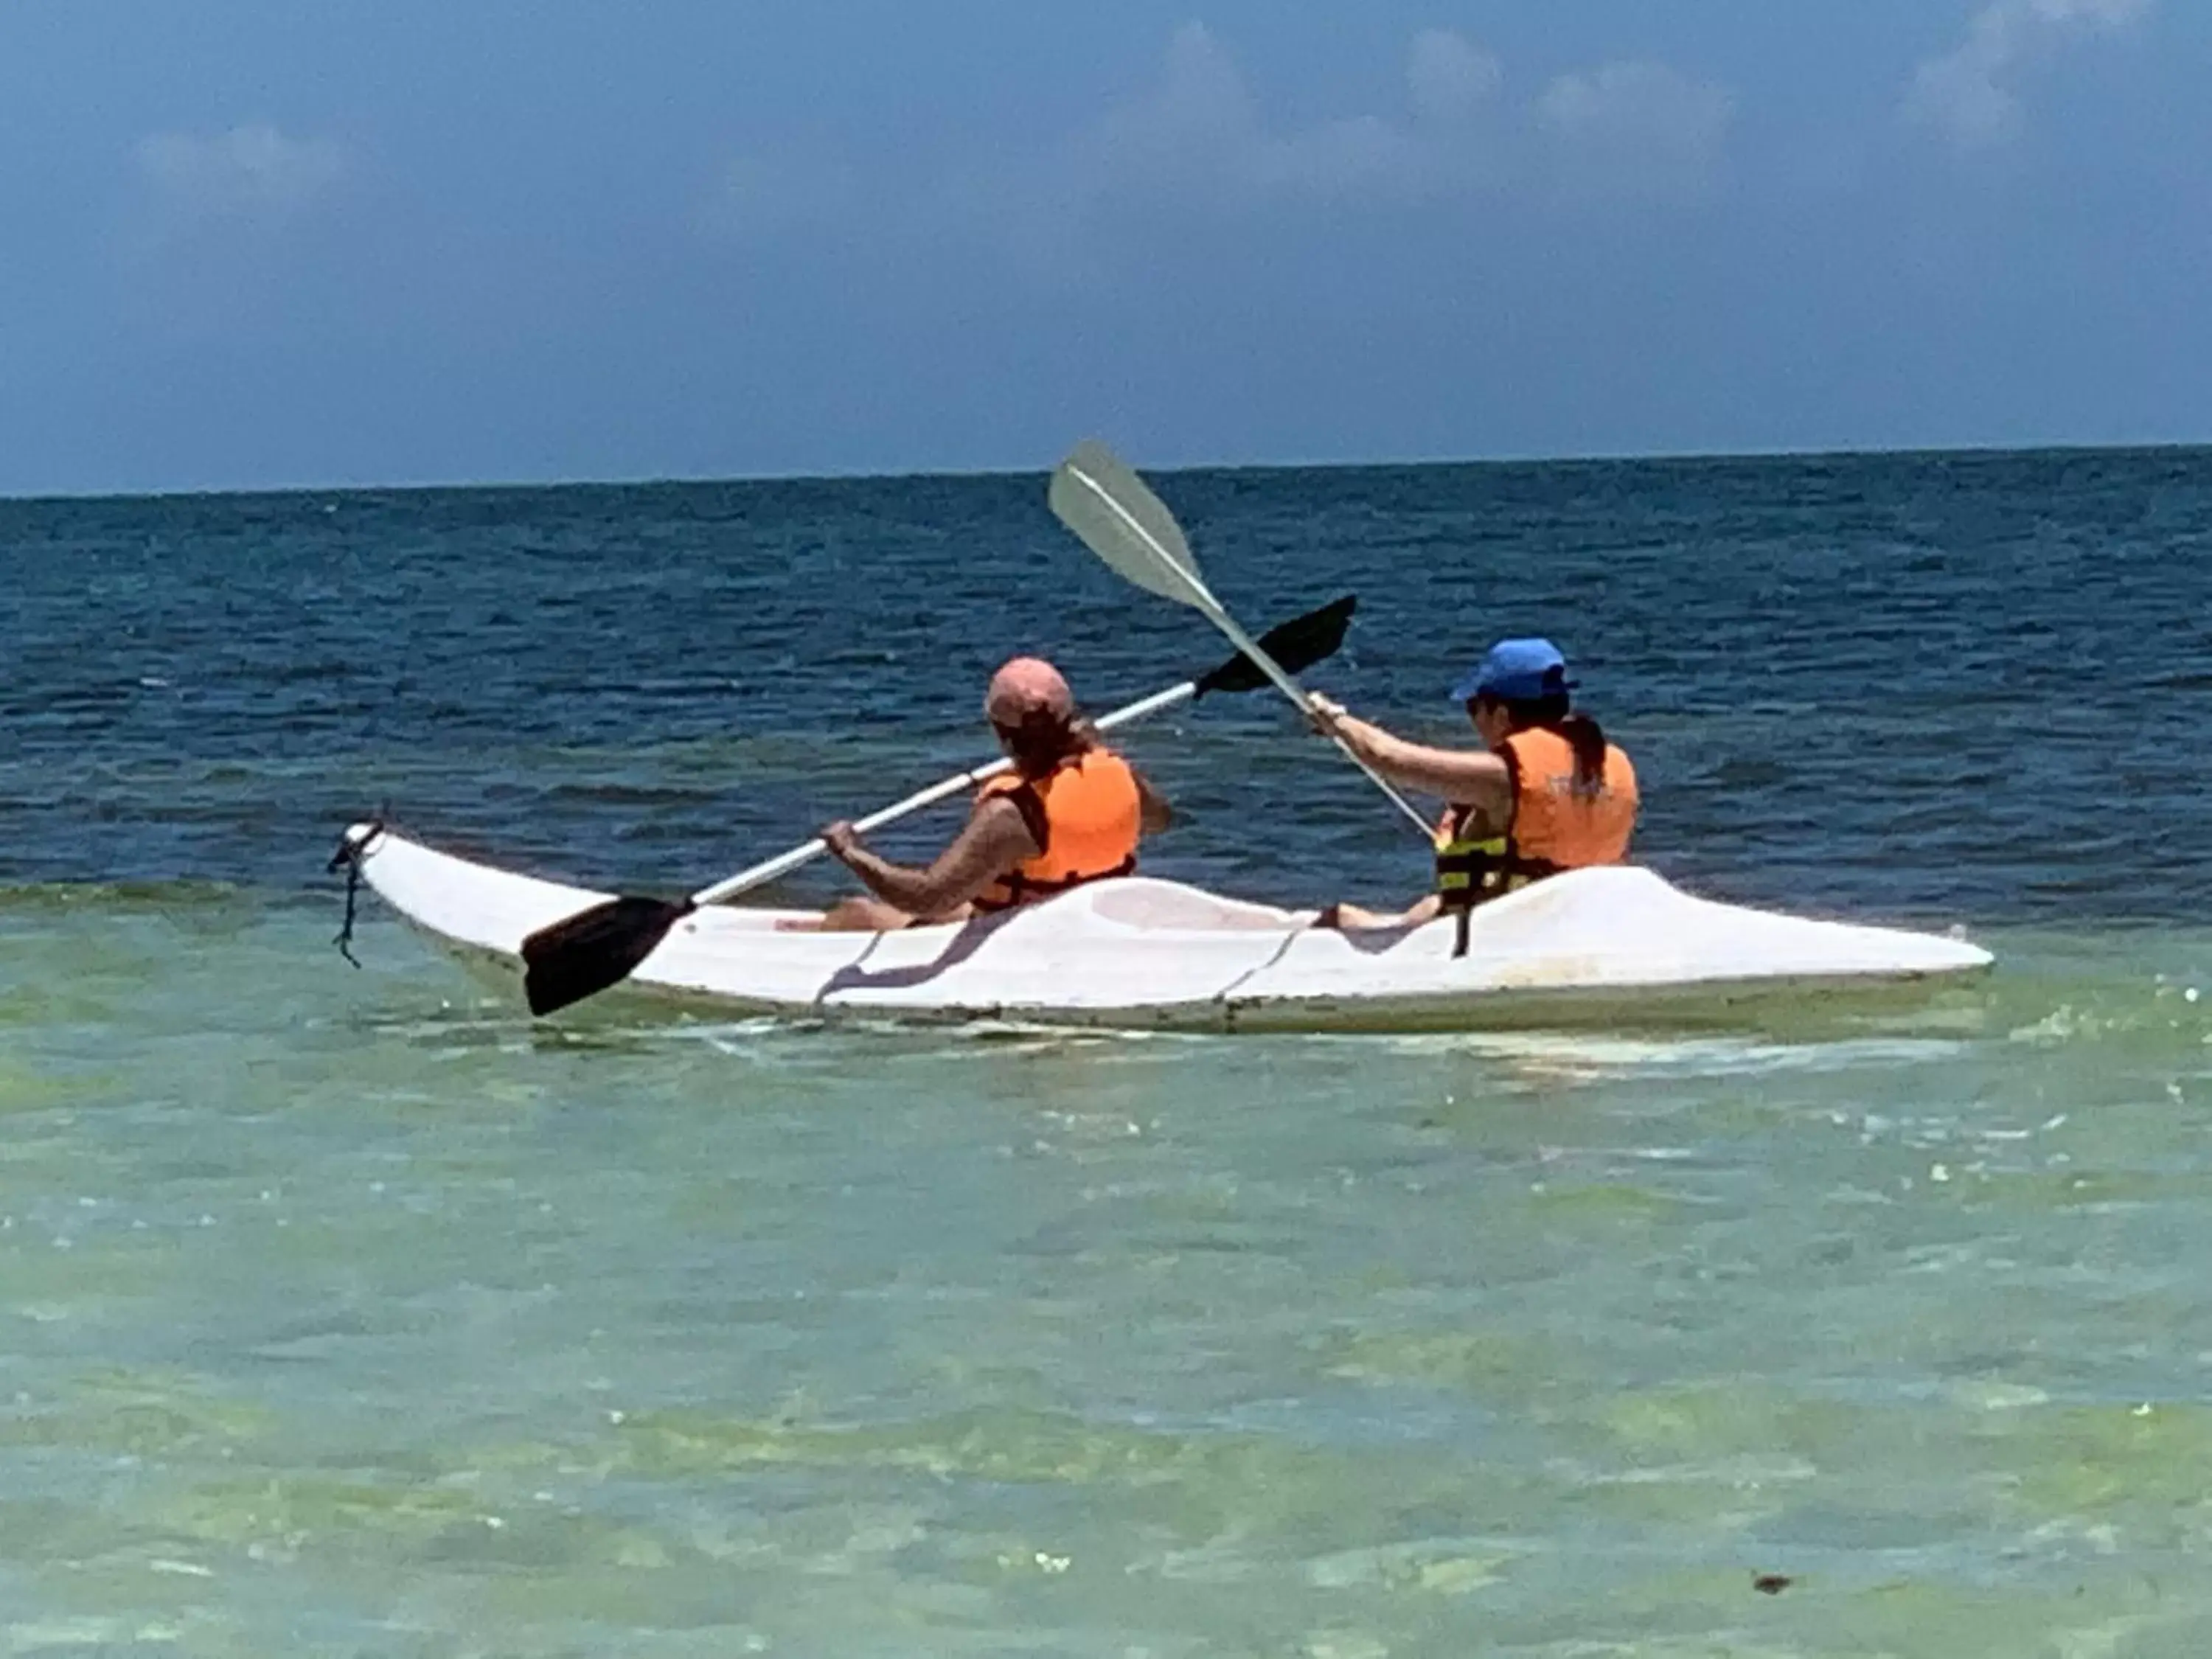 Windsurfing in "The Blue" eco lodge